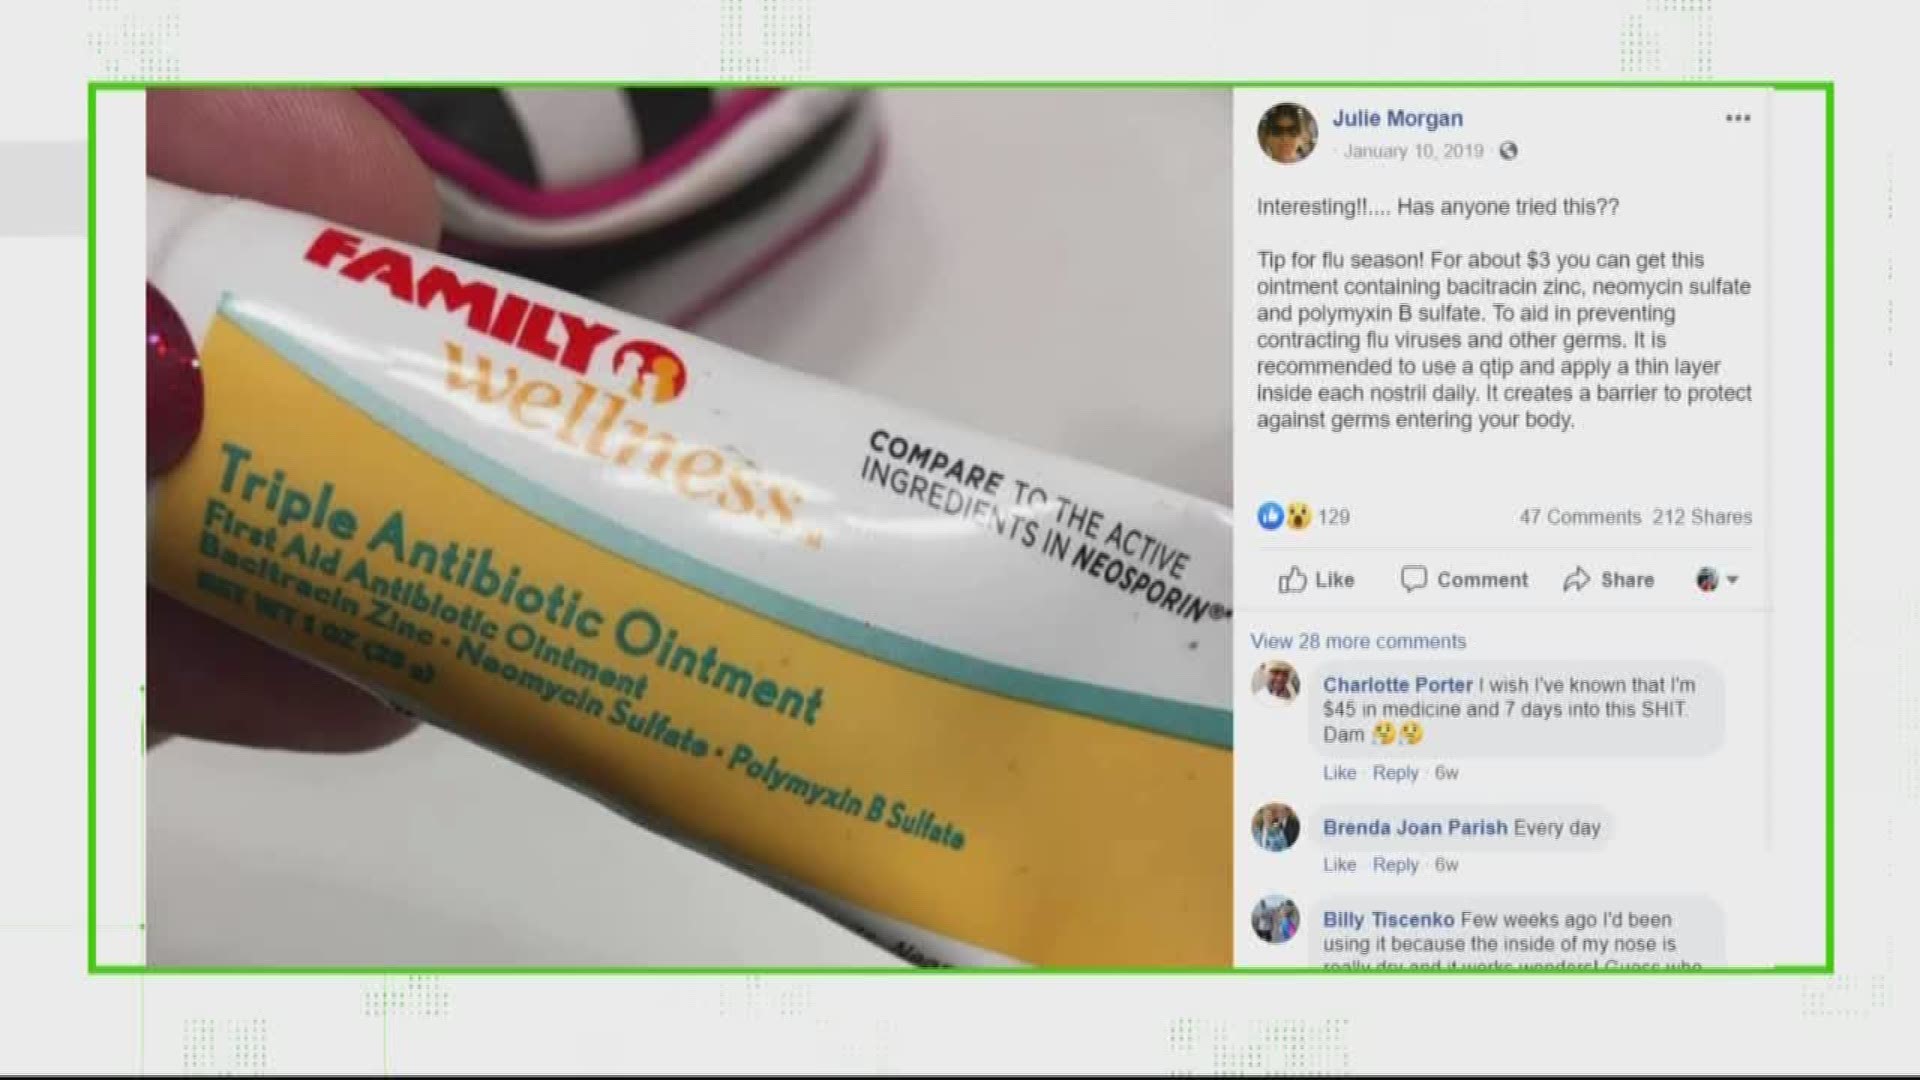 Home remedies and unproven preventative measures are being shared online contributing to a false sense of security about how to protect yourself against coronavirus.